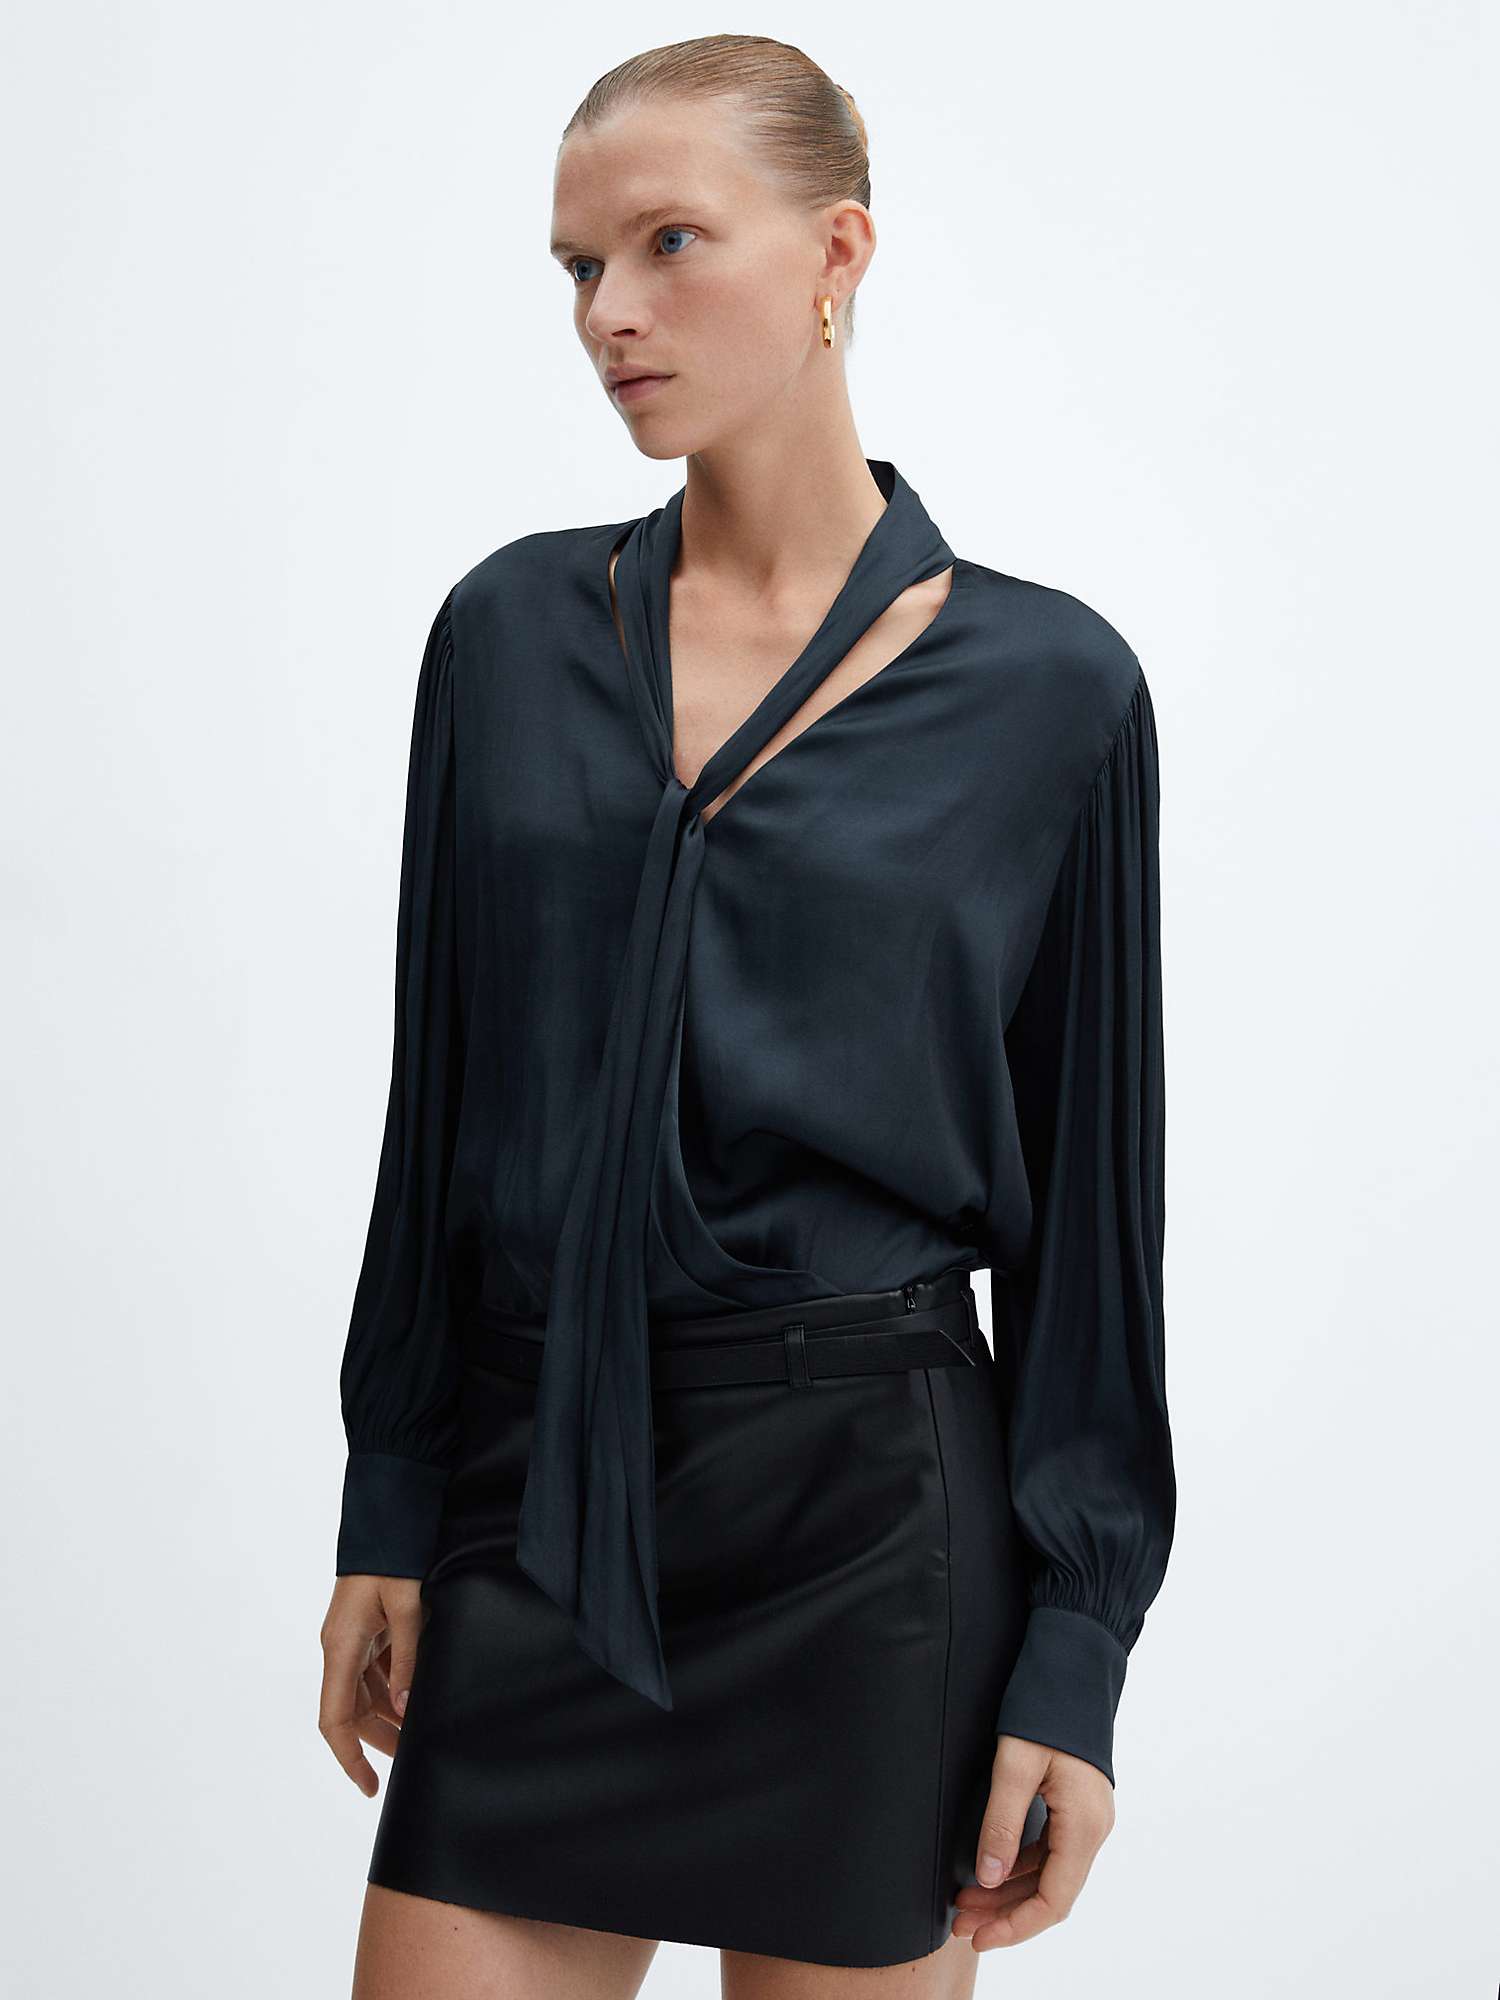 Mango Aire Bow Satin Blouse, Charcoal at John Lewis & Partners